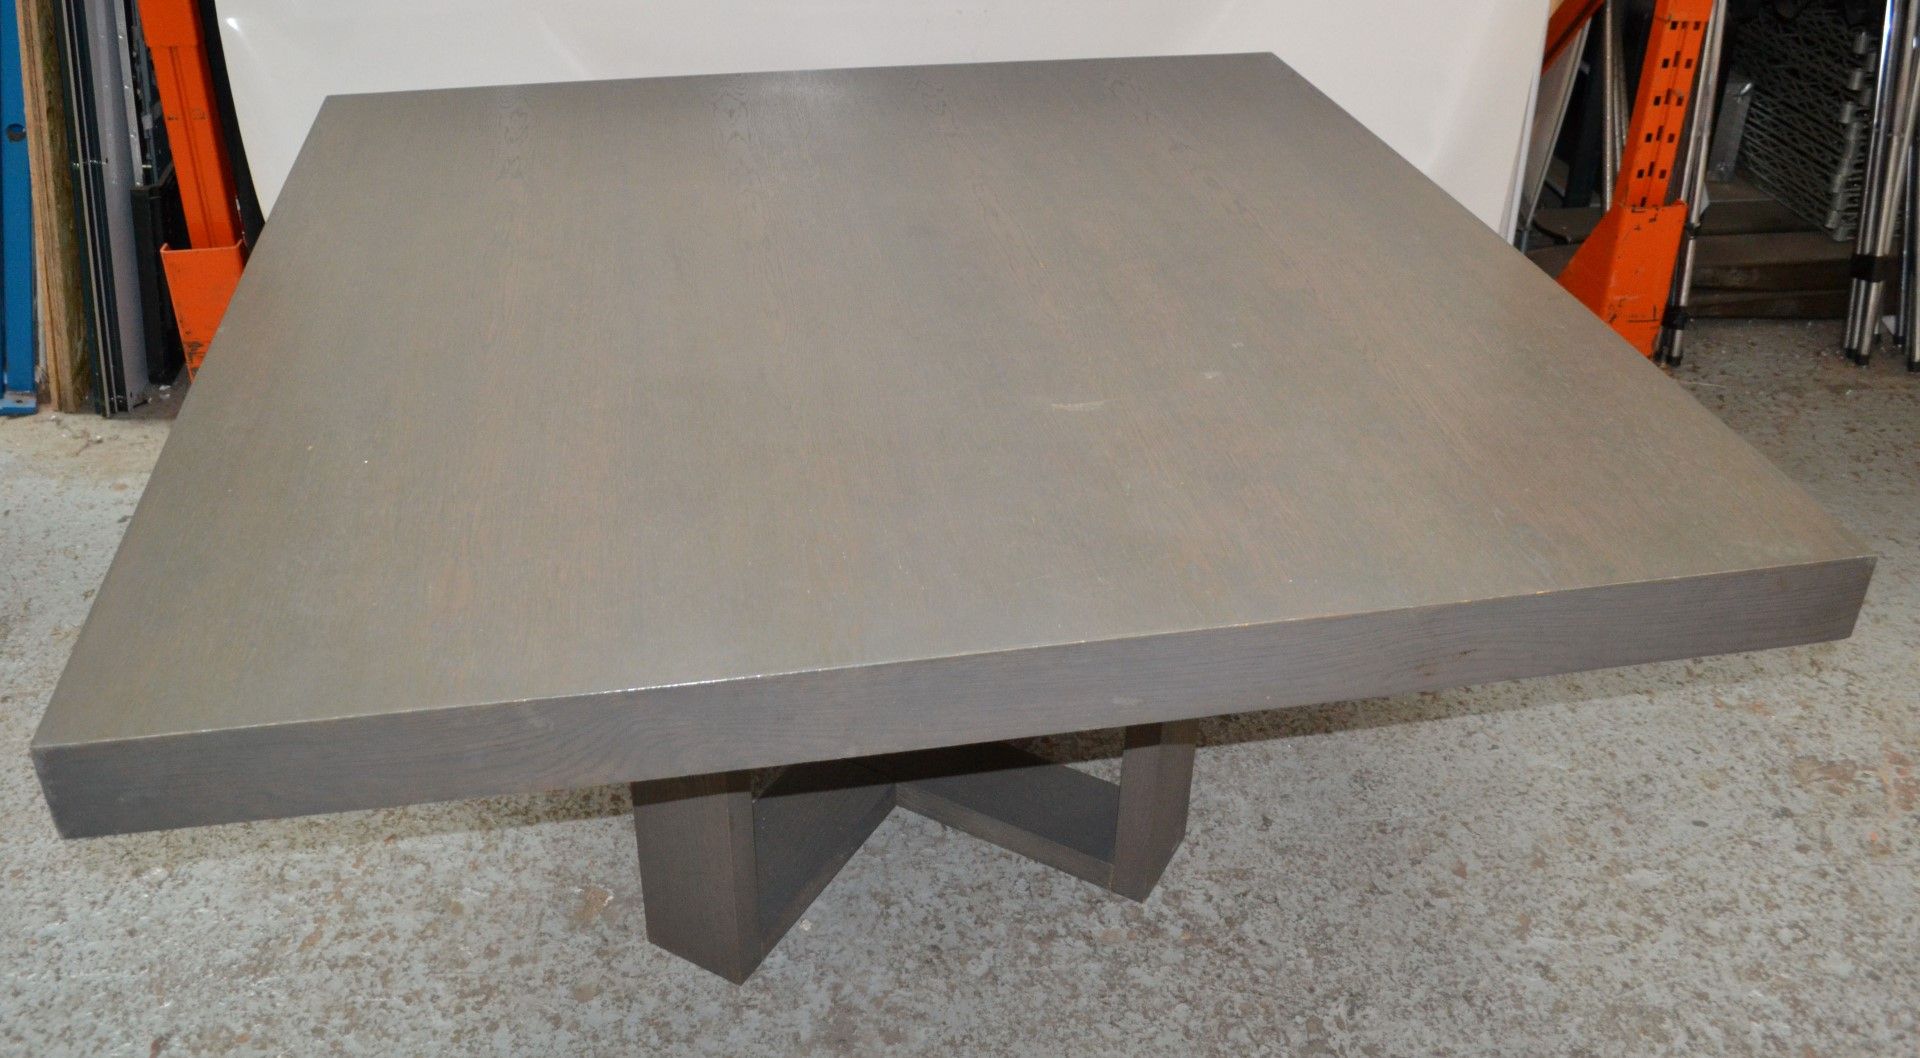 1 x Large Square Wooden Dining Table in a Grey Oak Coloured Finish - CL314 - Location: Altrincham - Image 2 of 10